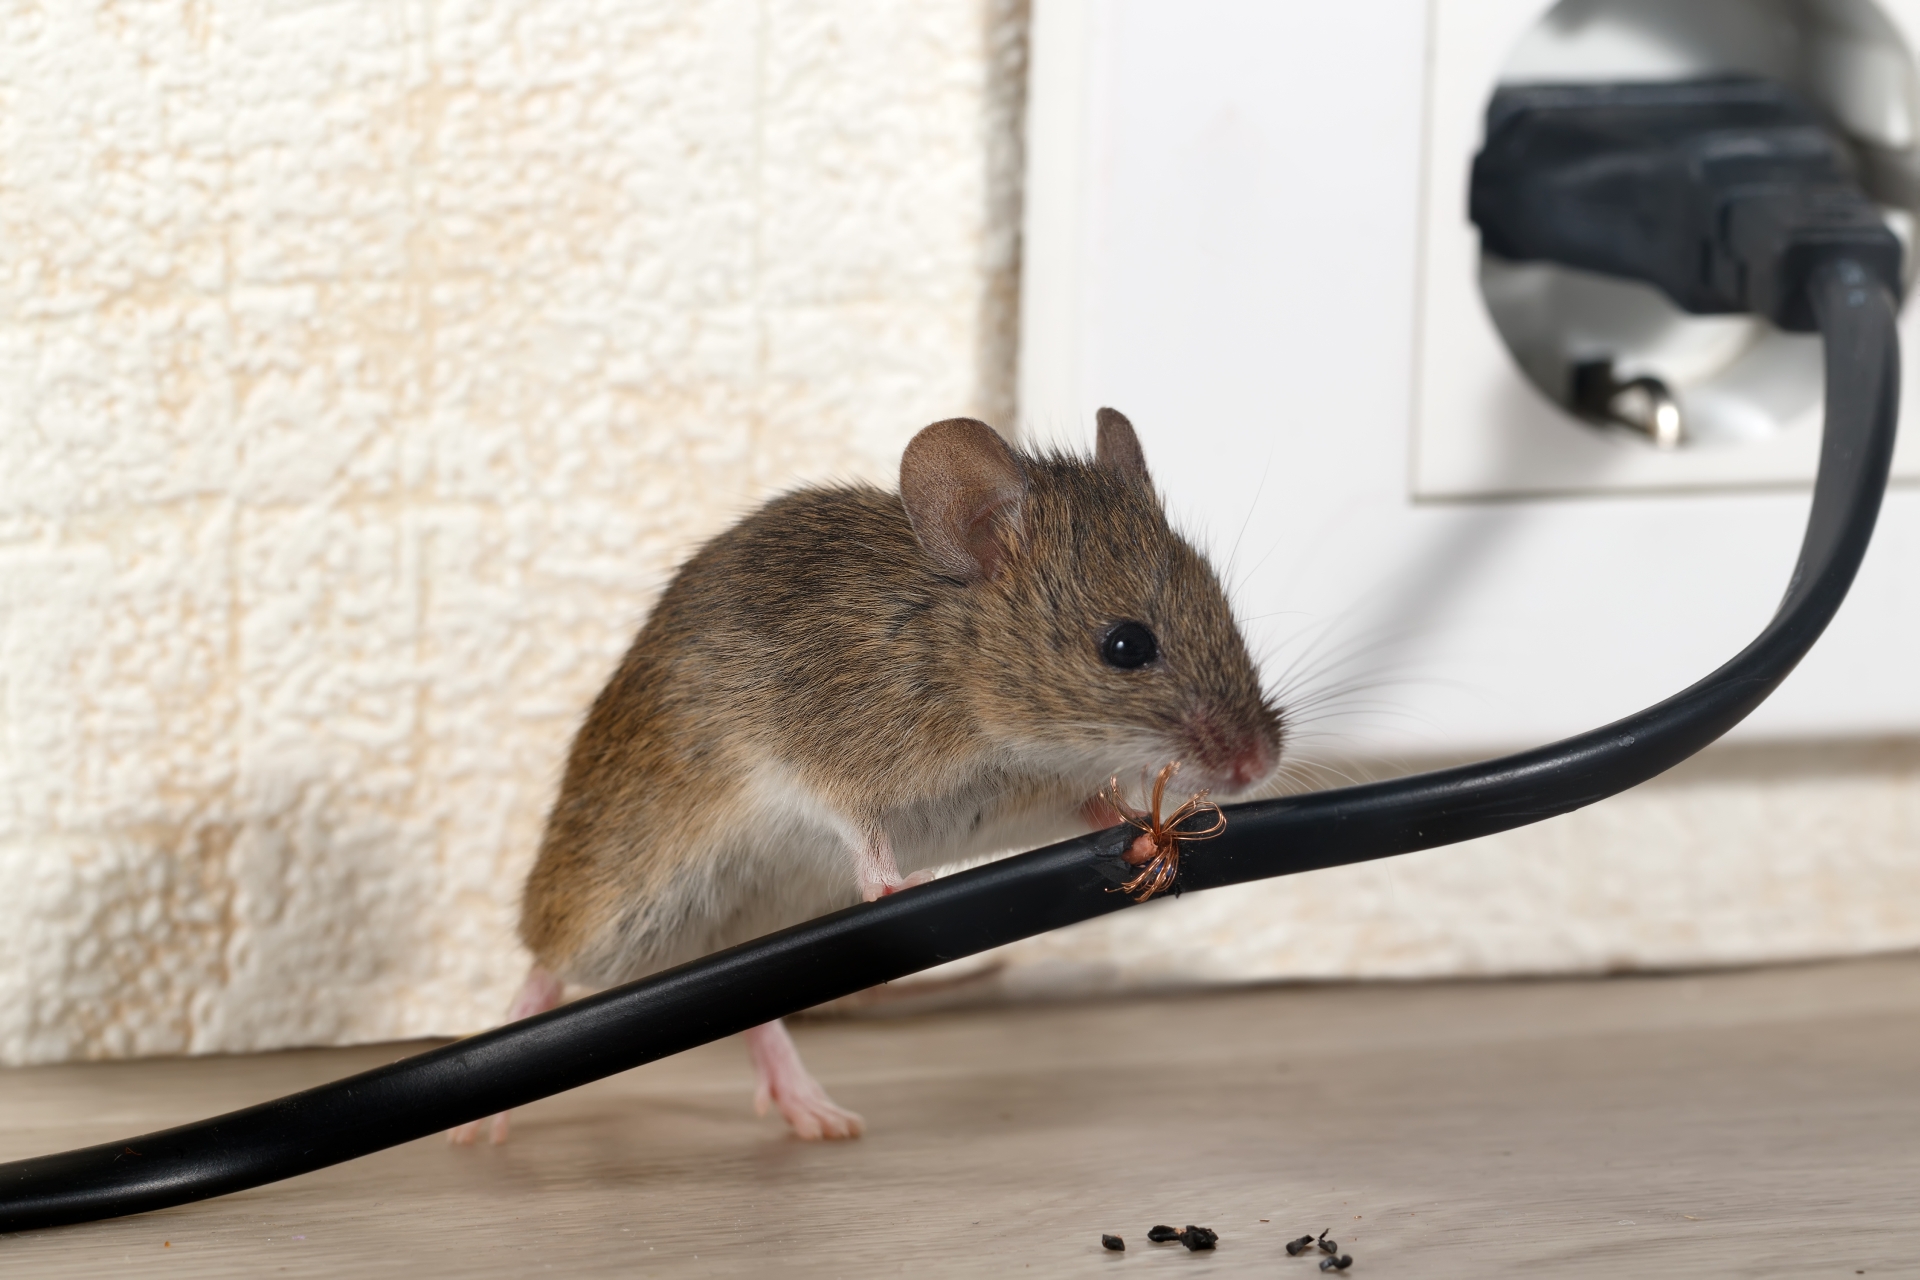 Mice Infestation, Pest Control in Crouch End, N8. Call Now 020 8166 9746